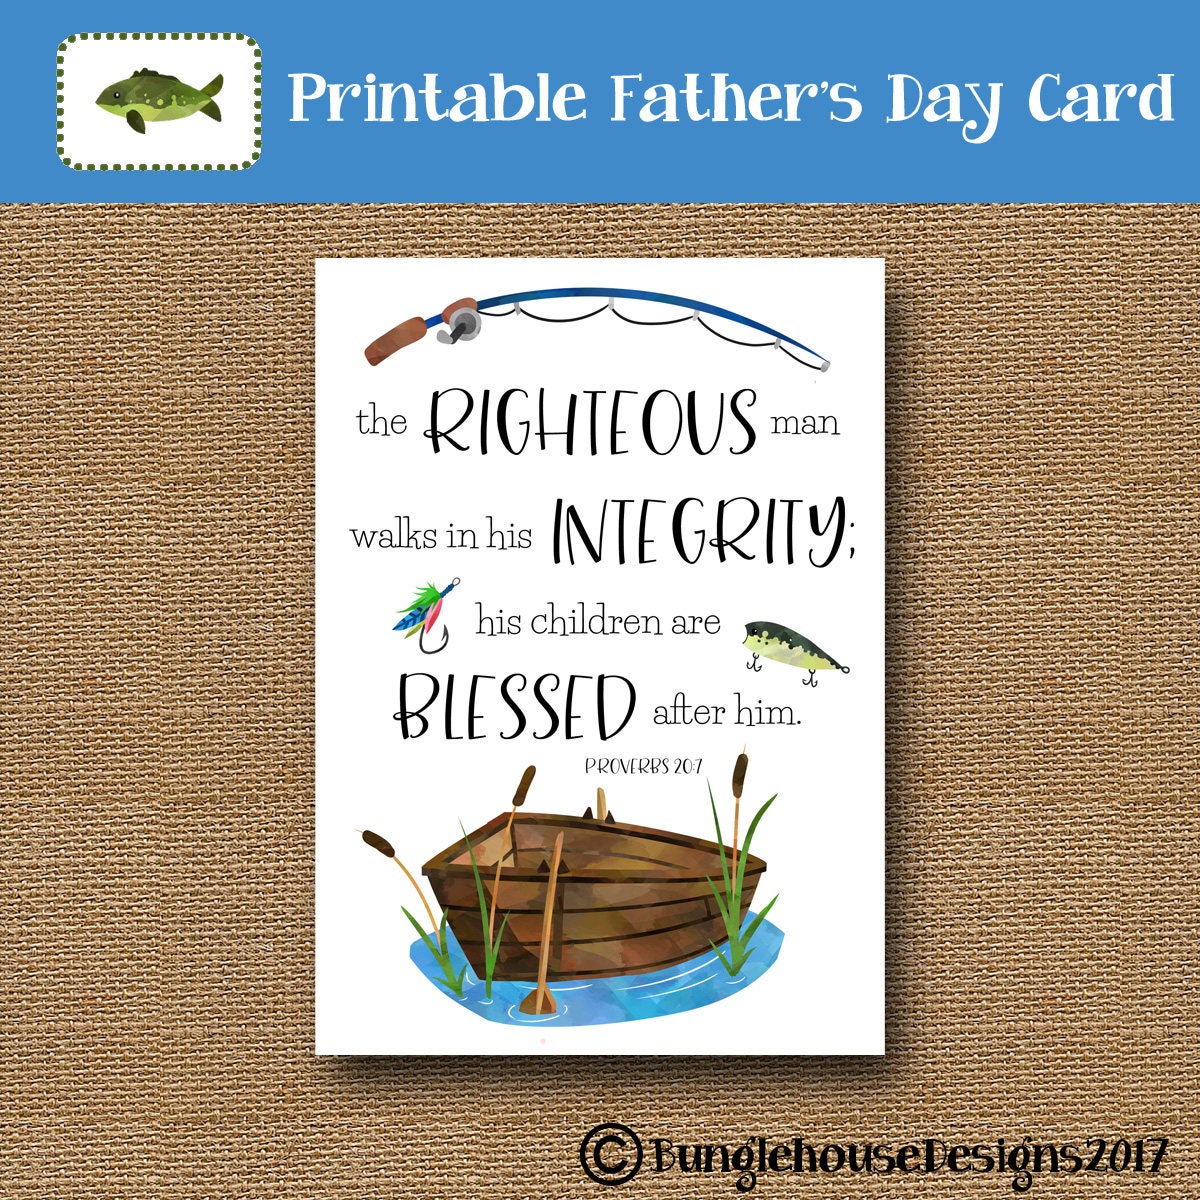 printable-father-s-day-card-christian-father-scripture